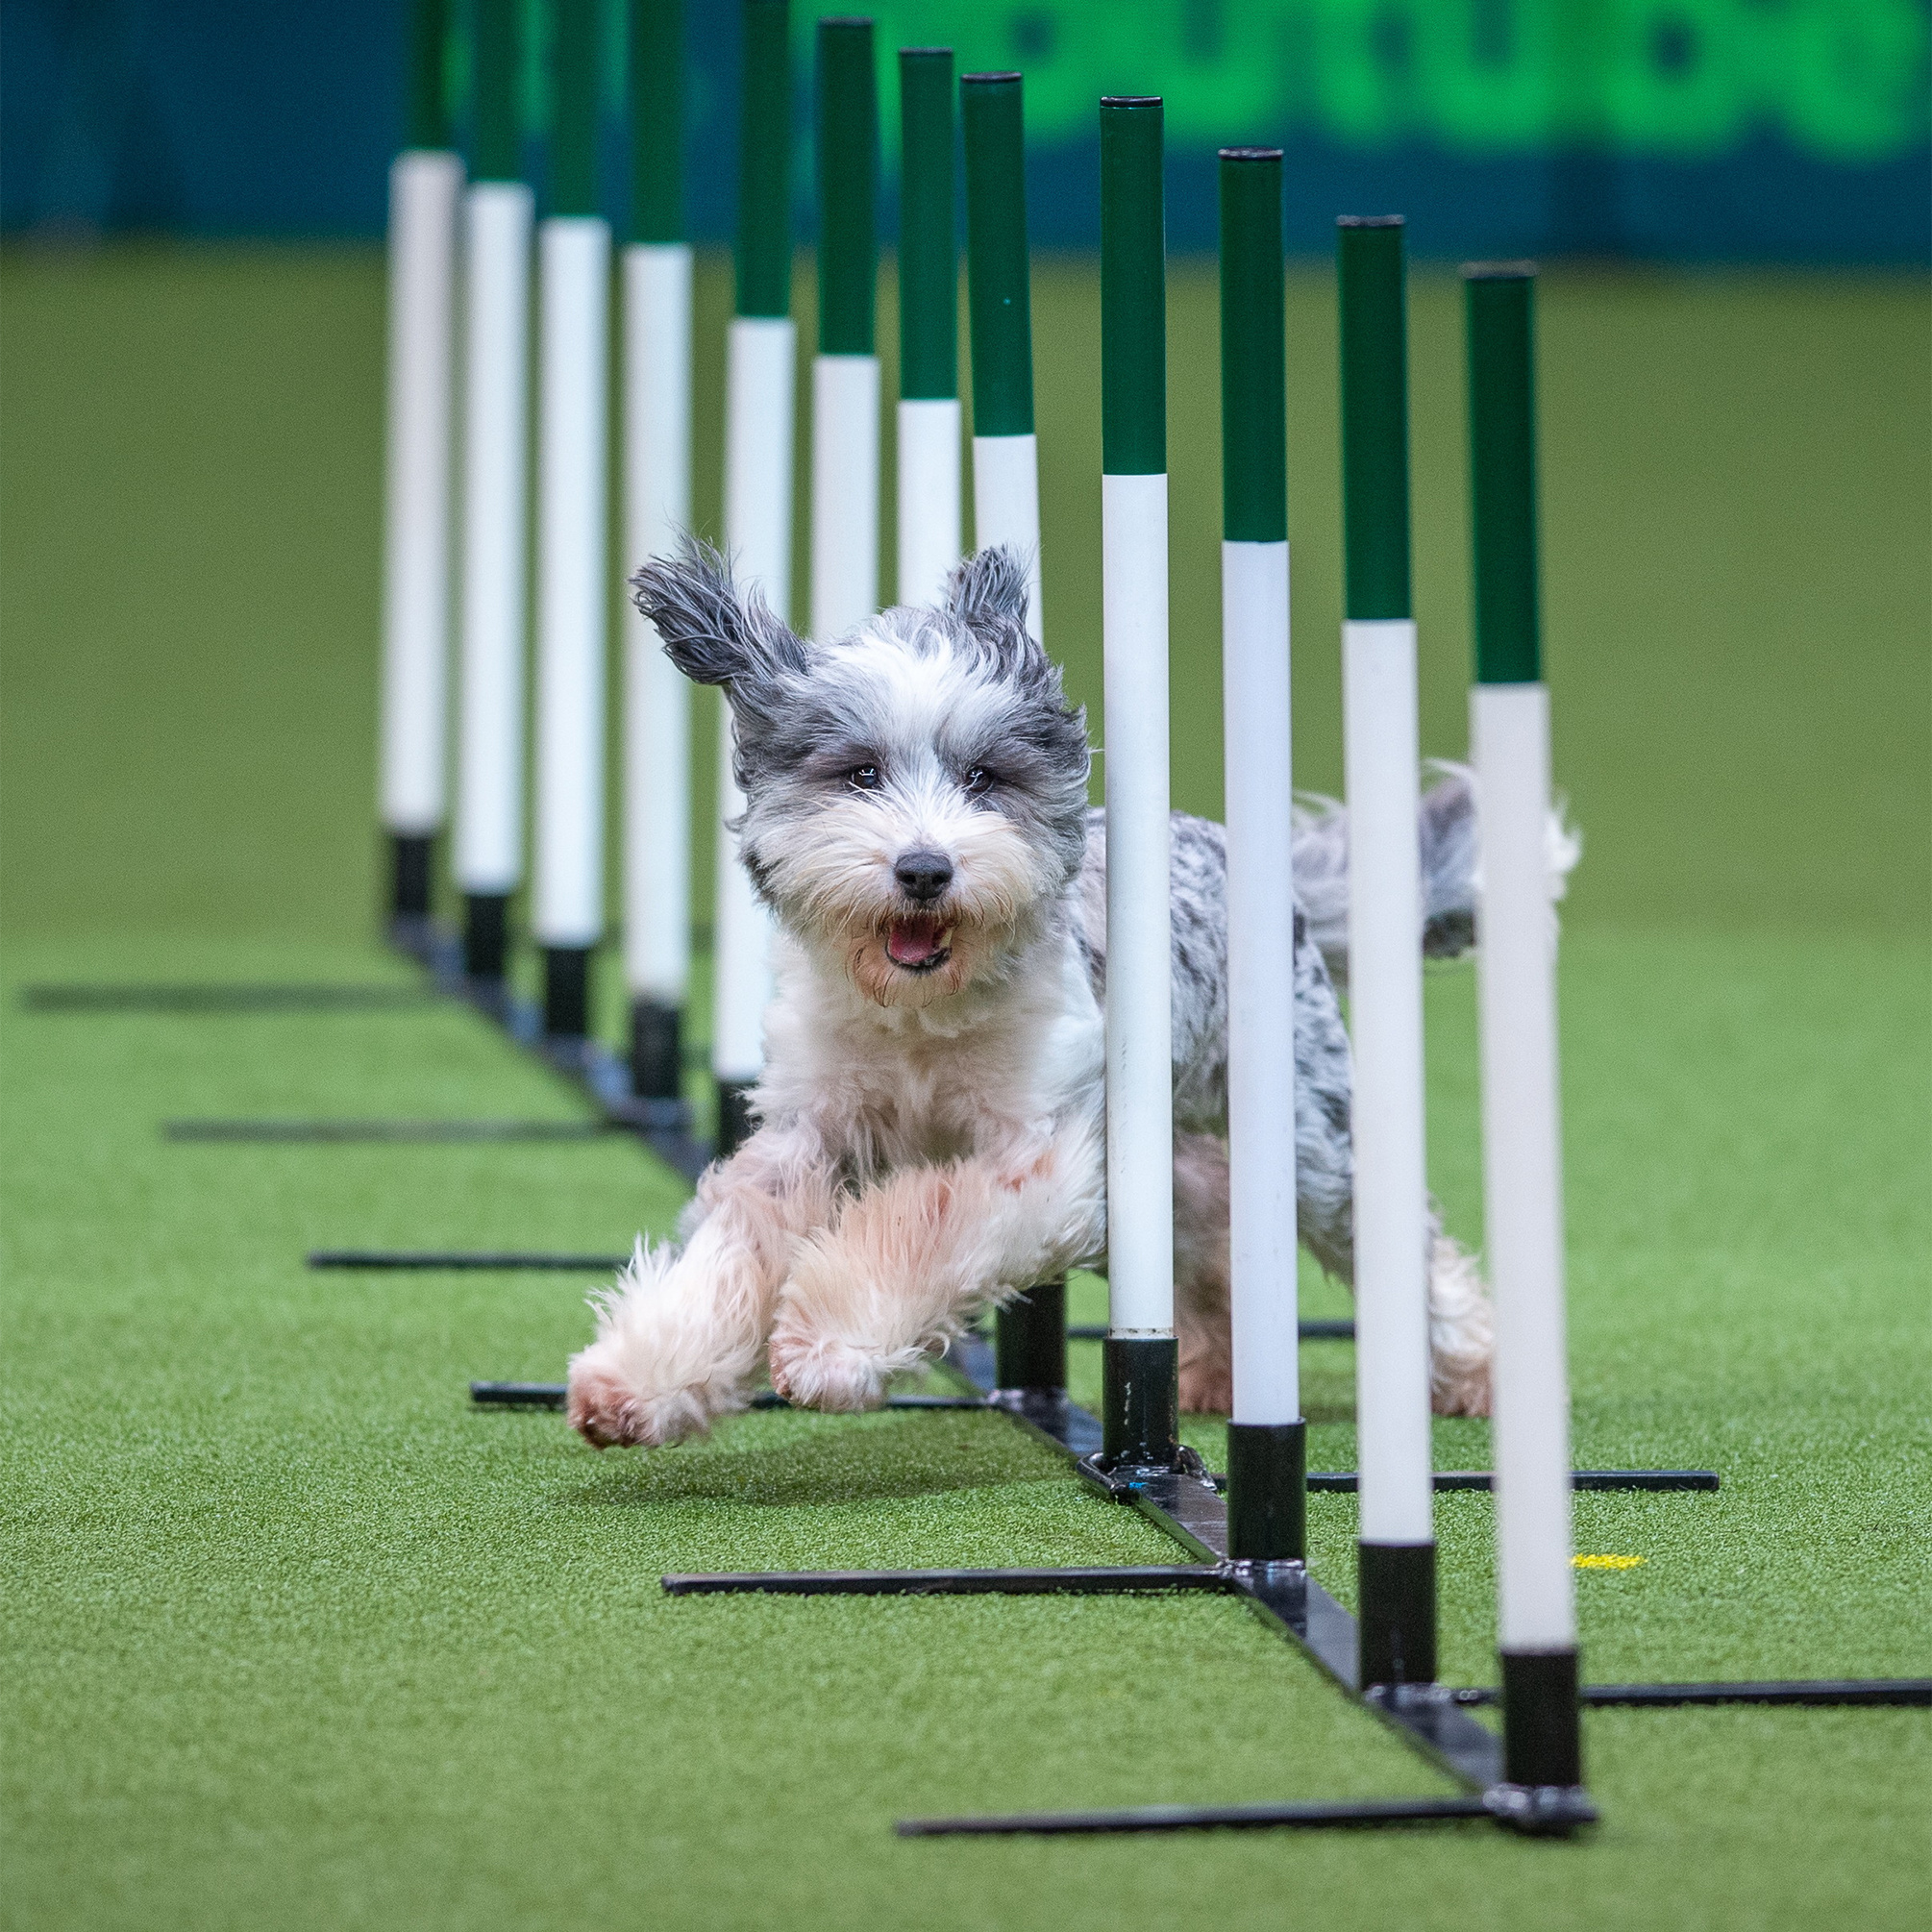 HD wallpaper, Mobile Hd Dog Sports Background Image, Event Competitions, 2010X2010 Hd Phone, Crufts Dog Show, Greatest Dog Show